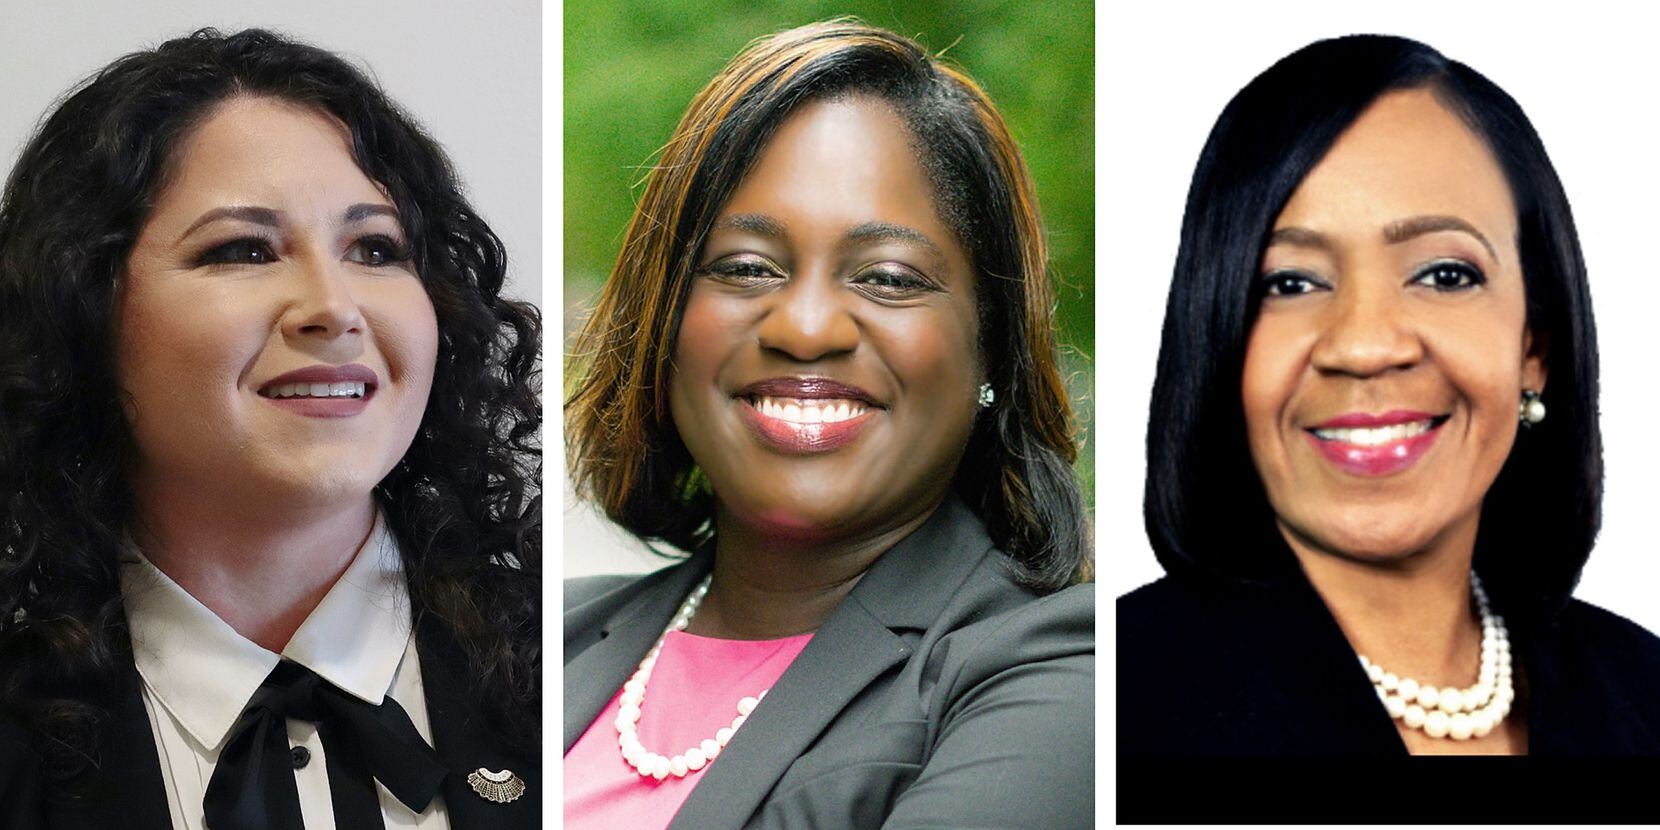 Dallas lawyers Elissa Wev, left, and Monique Bracey Huff, center, are running against County...